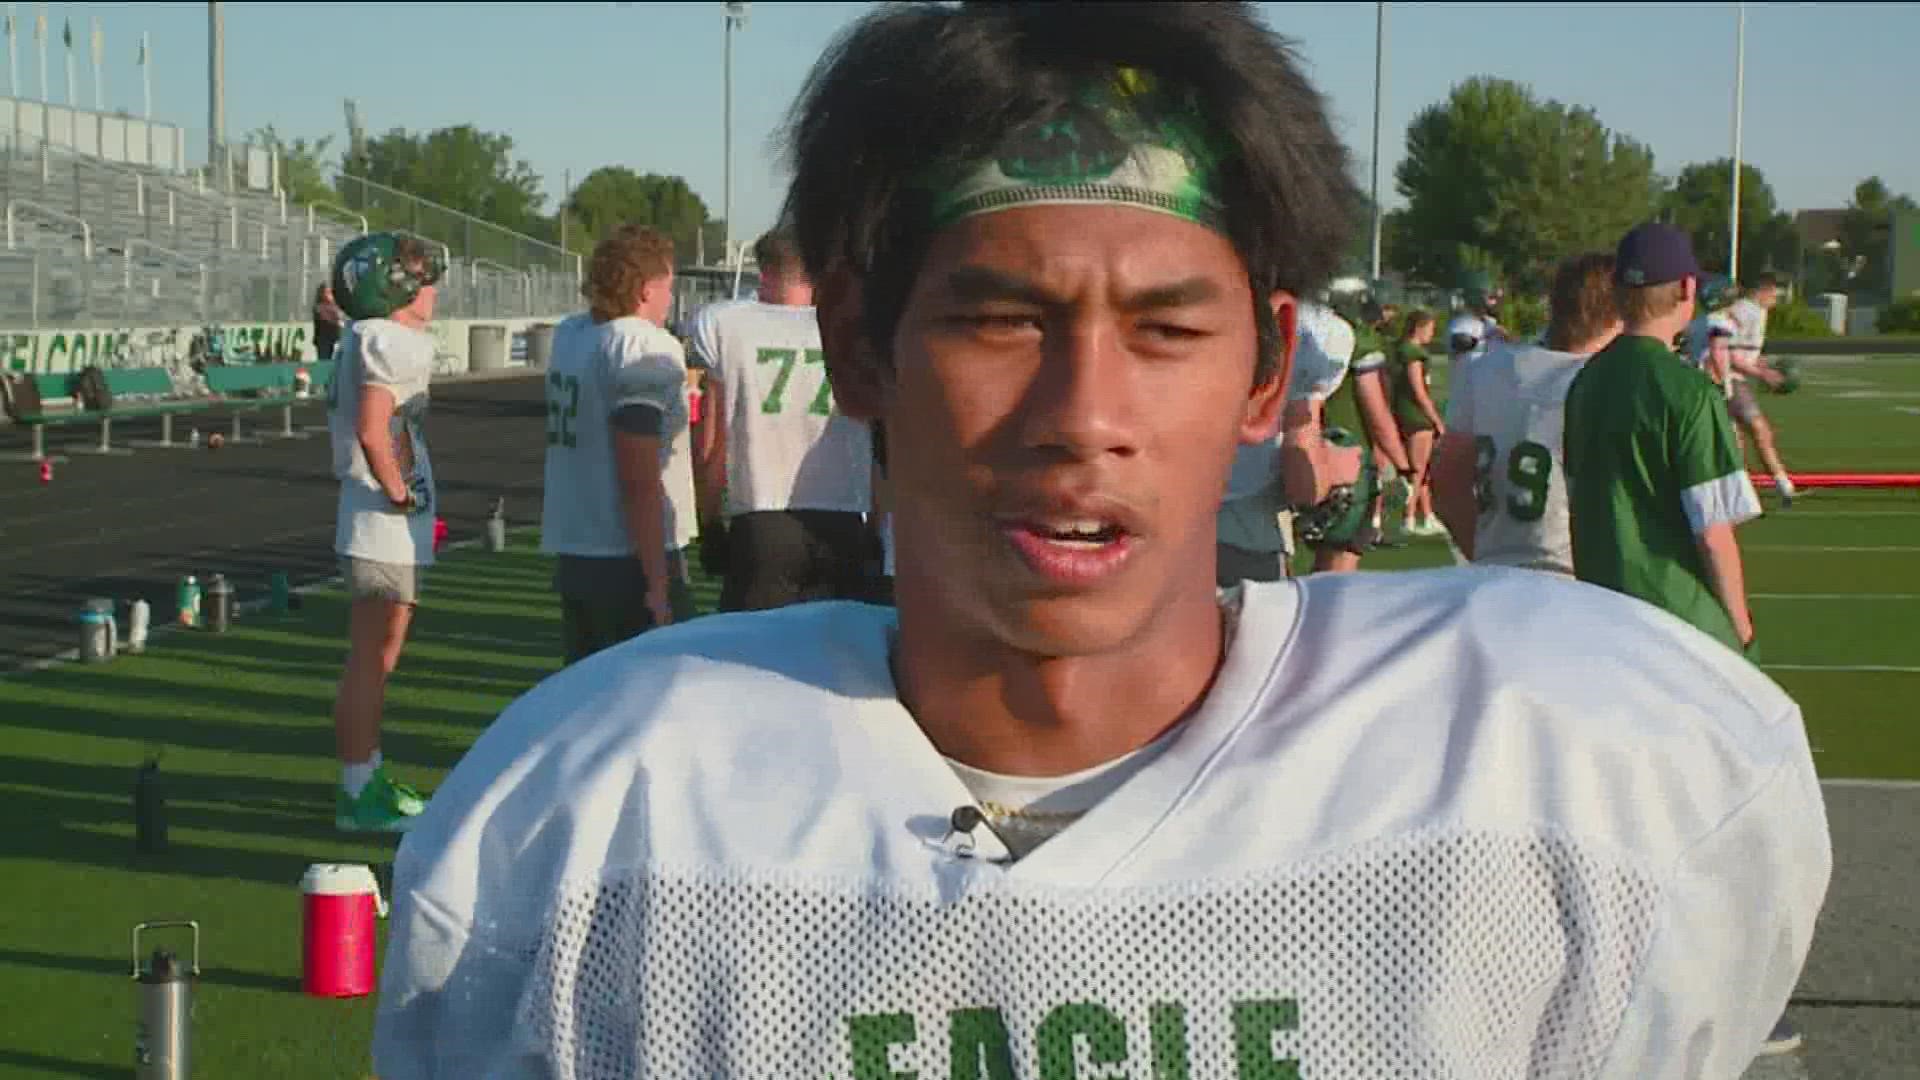 Last year tested the program after numerous injuries, but now Eagle High is healthy again and ready for a challenge.